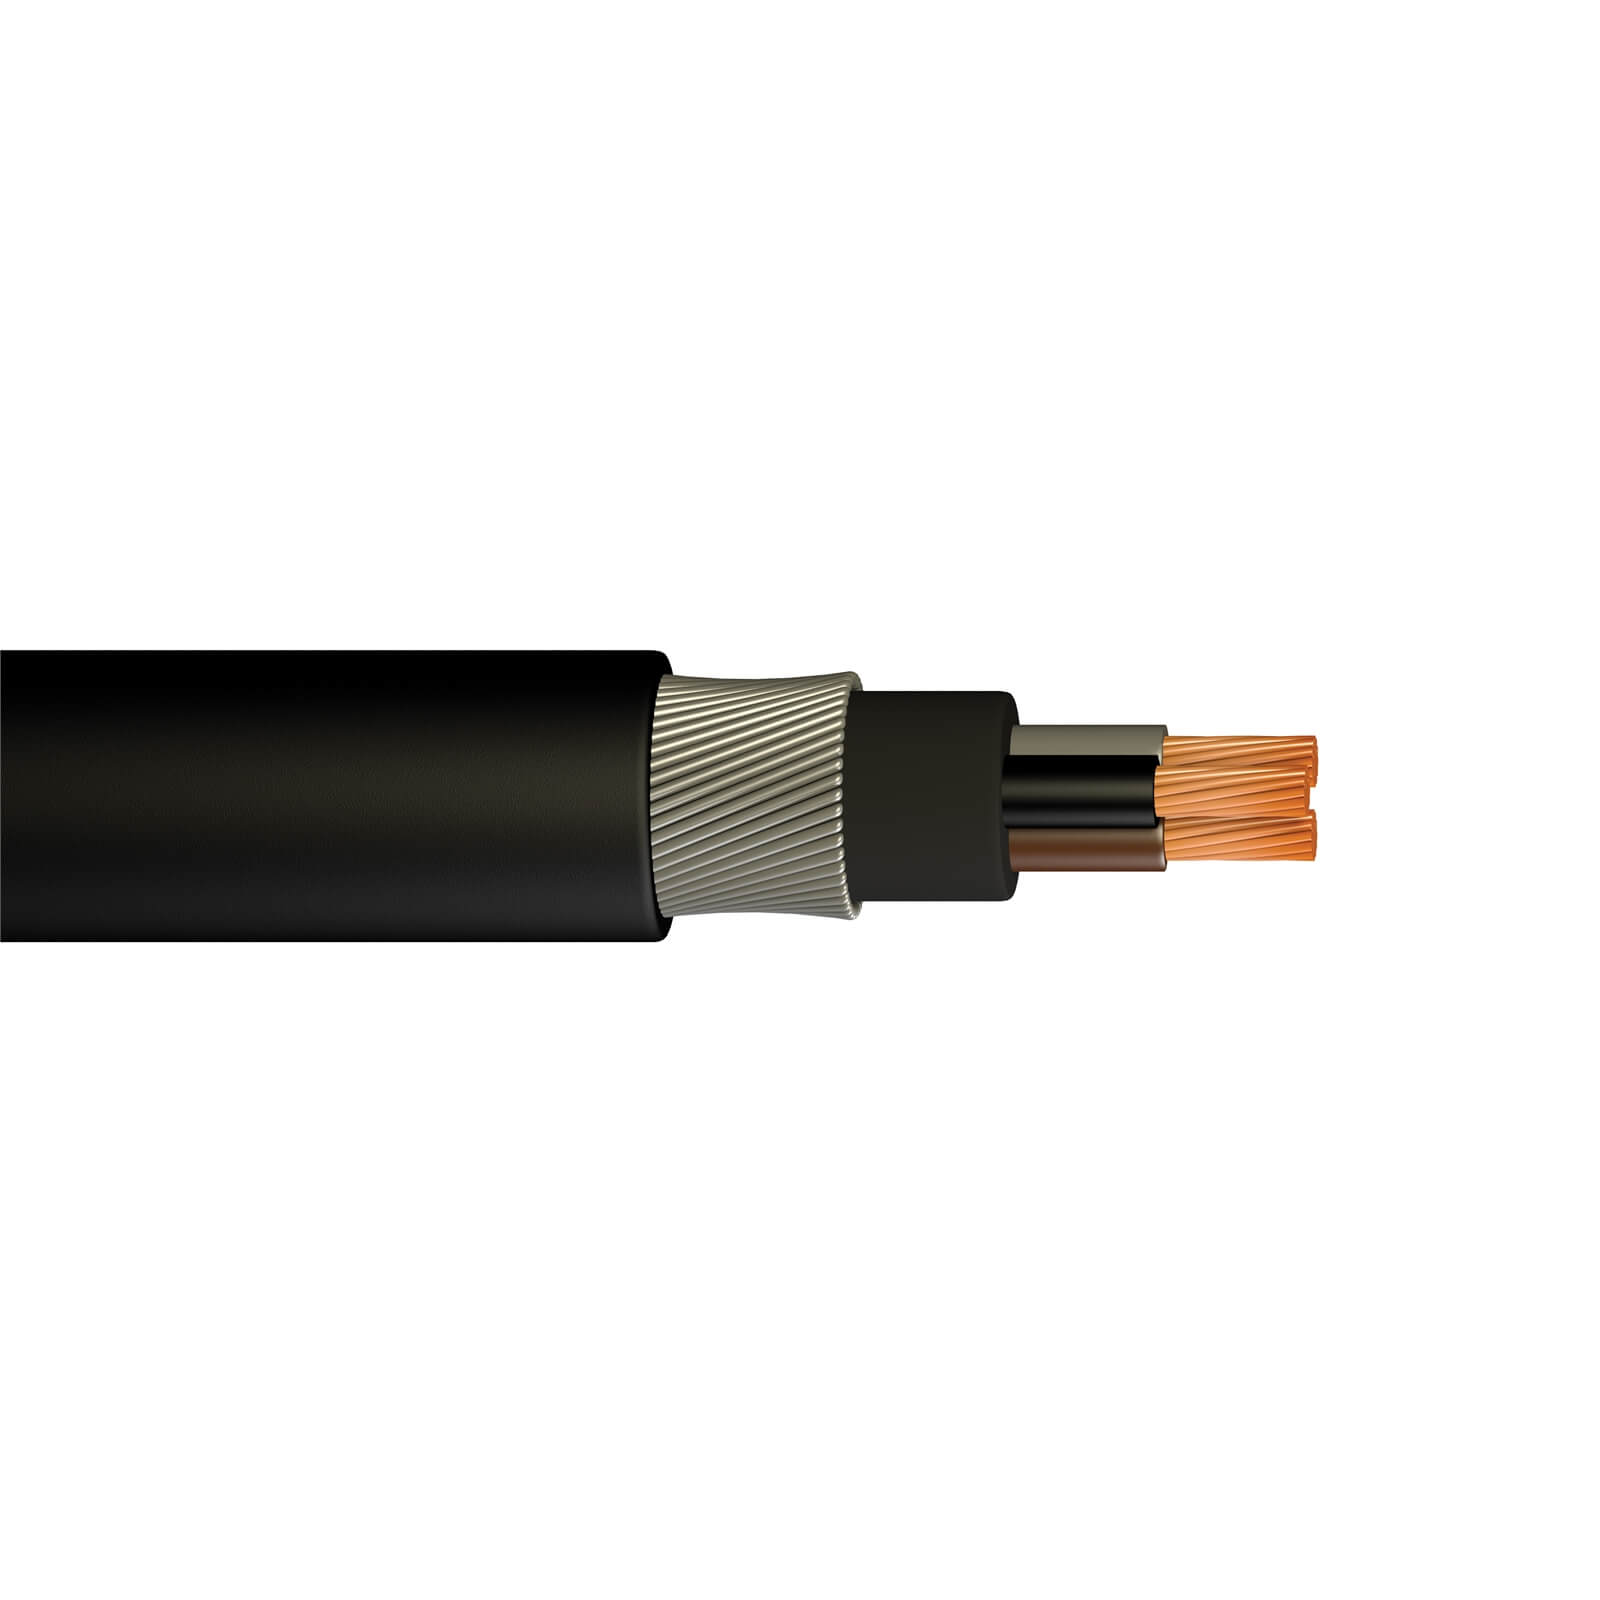 Photo of Pitacs 1.5mm 3 Core Steel Armoured Cable 25m Black 6943x